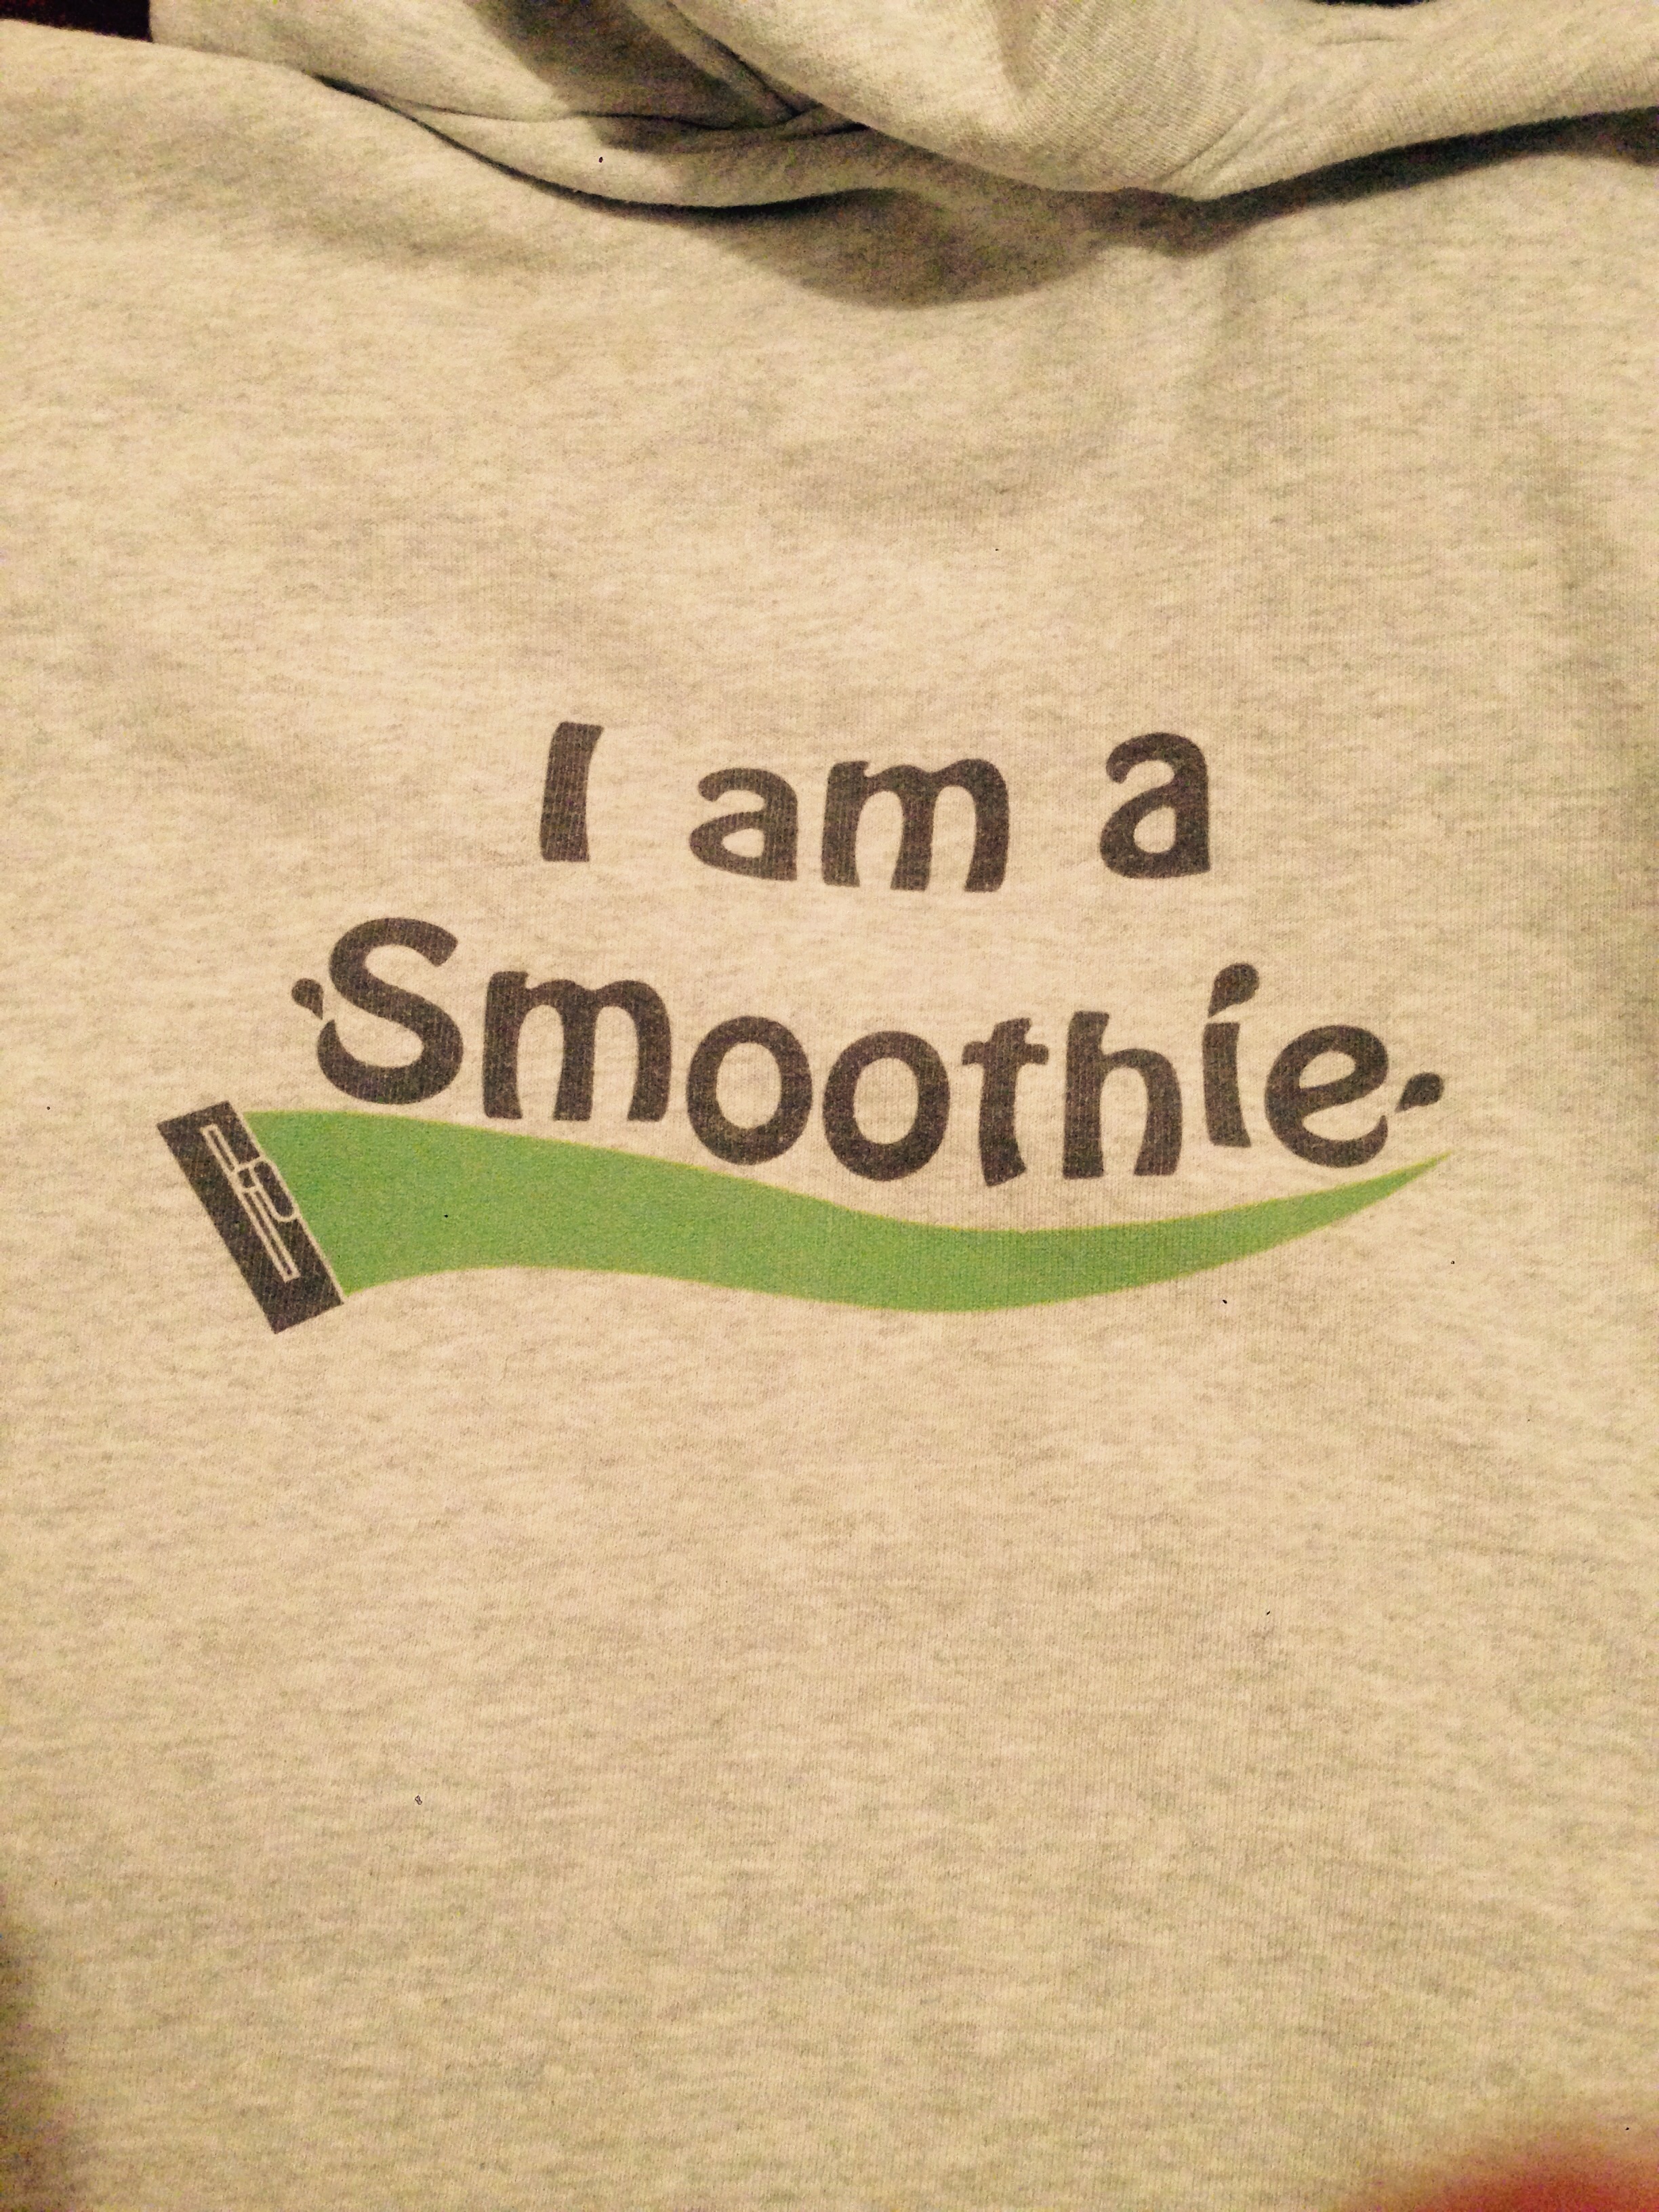 Enter the #BGSmoothie Smoothie competition here...